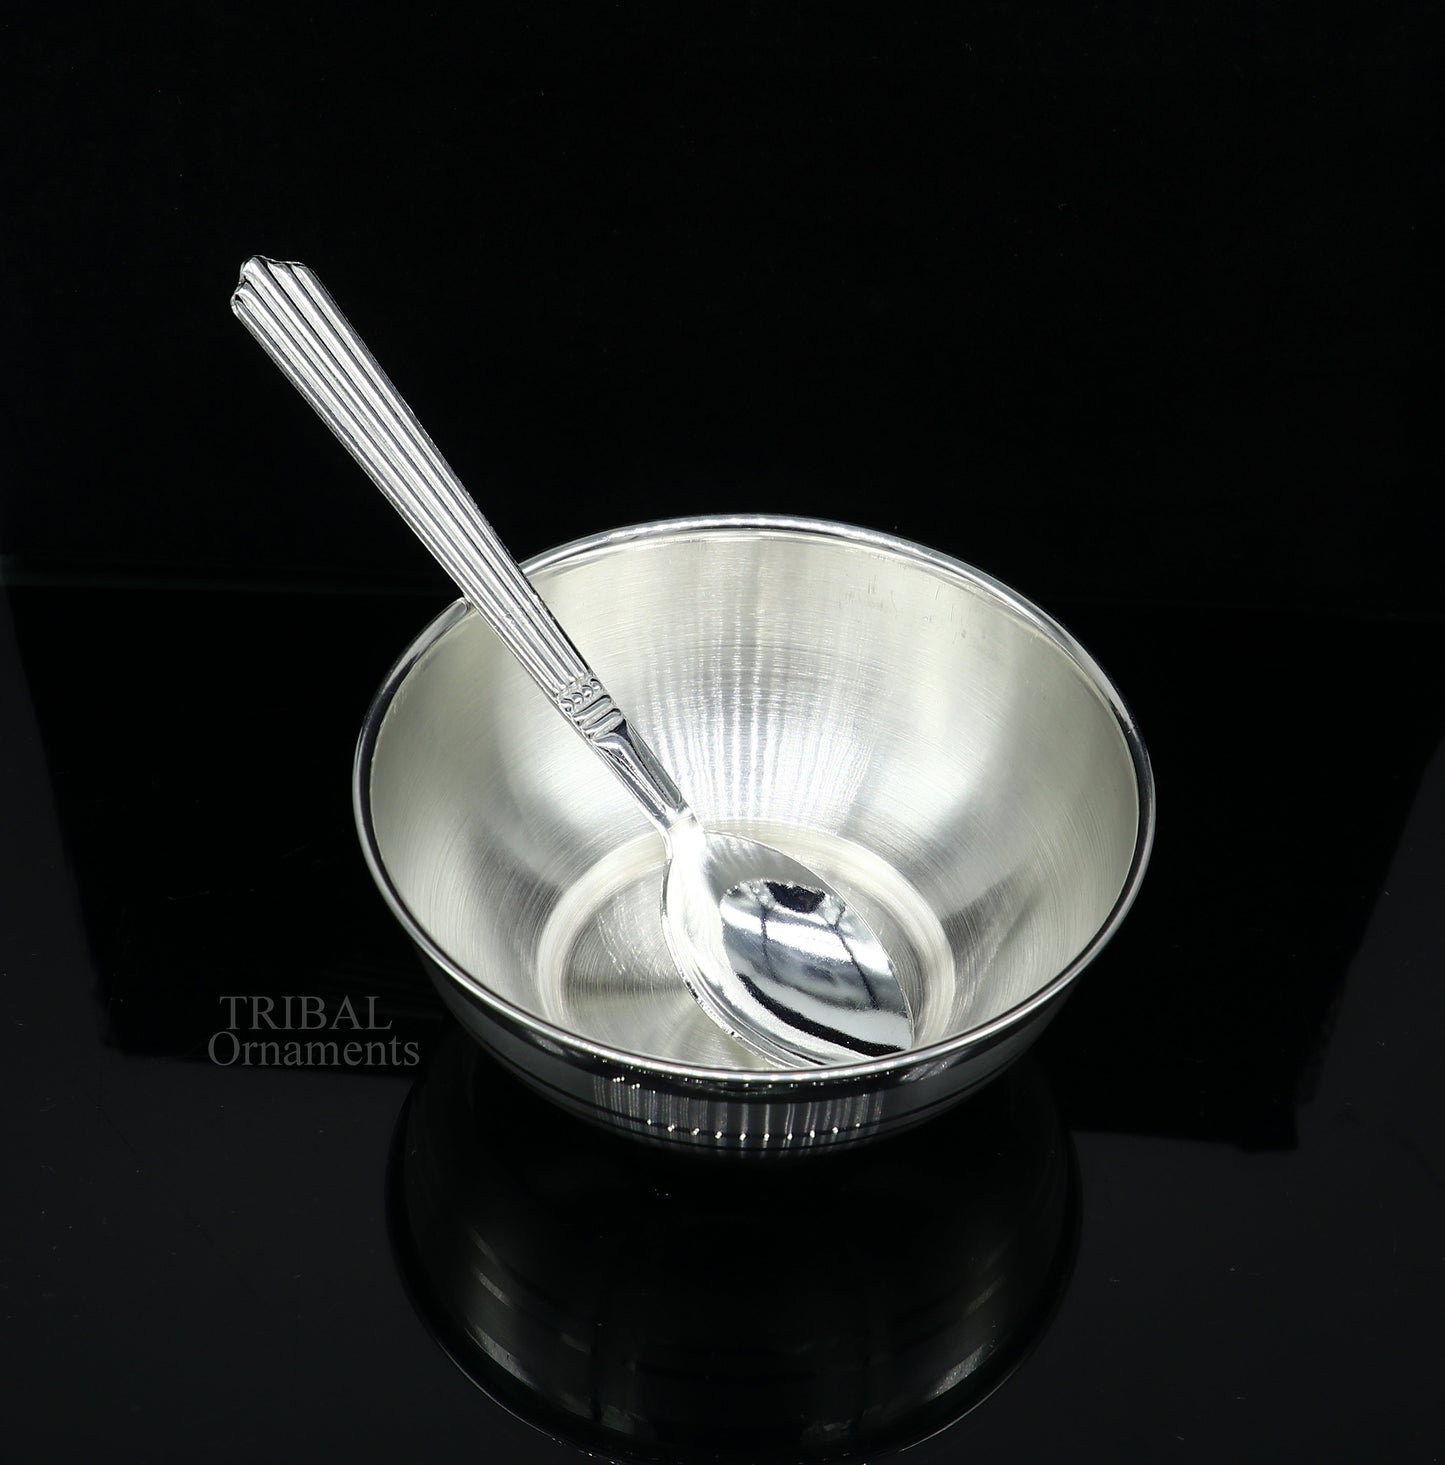 999 pure sterling silver handmade solid silver bowl and spoon, healthy serving bowl, silver vessels, baby serving utensils baby set sv261 - TRIBAL ORNAMENTS